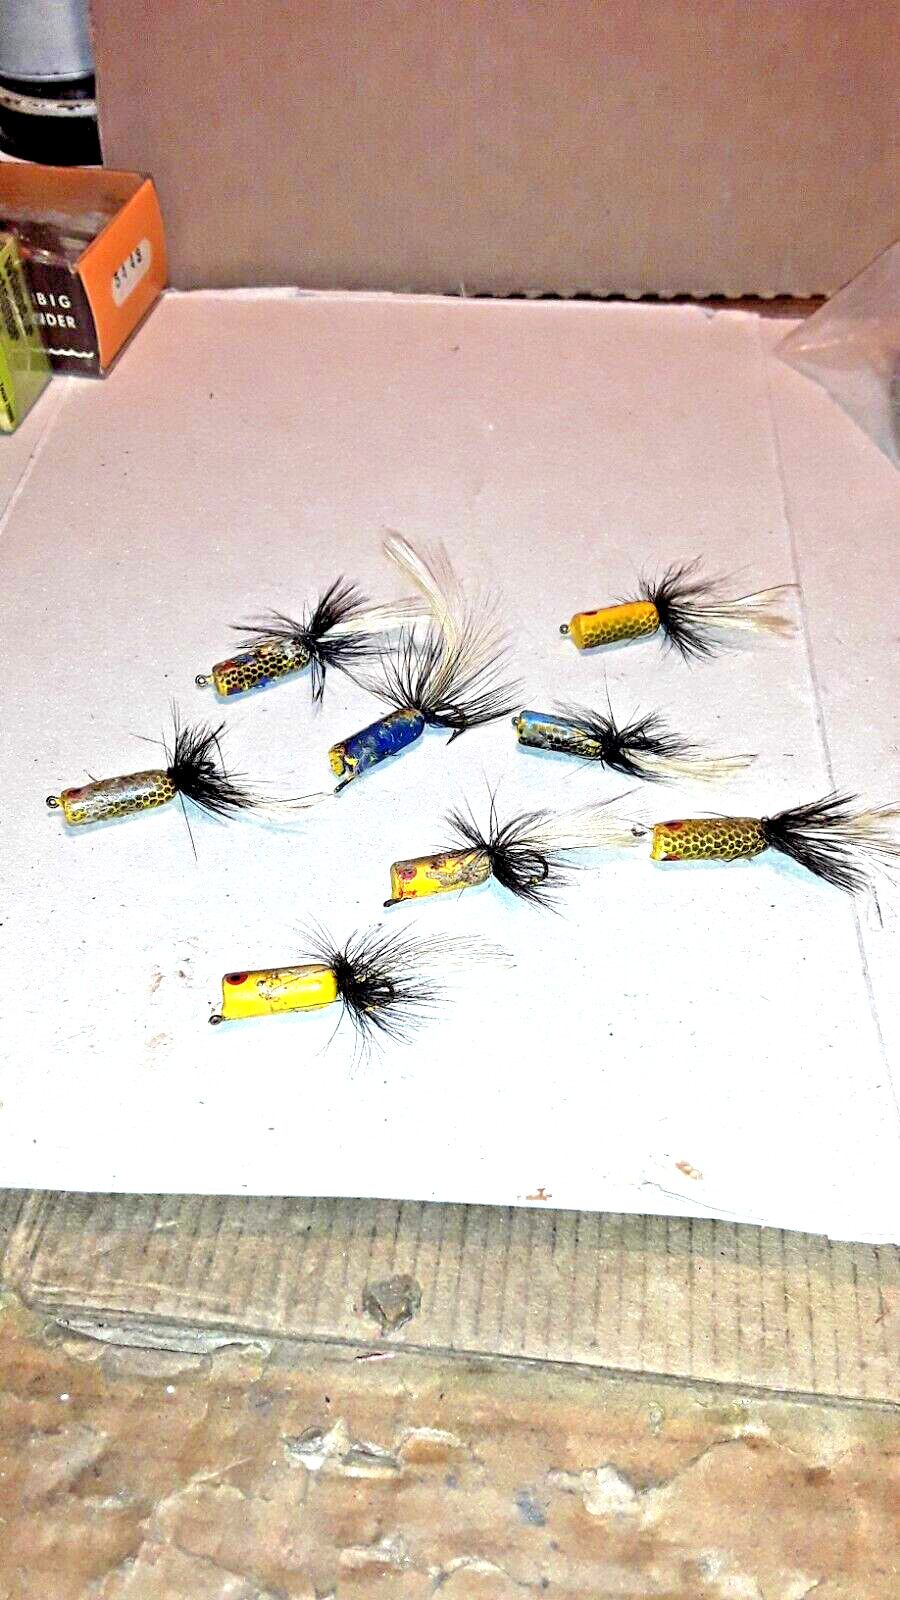 Fly fishing Popper flies. Lot of 8. pre-Owned. - Simpson Advanced